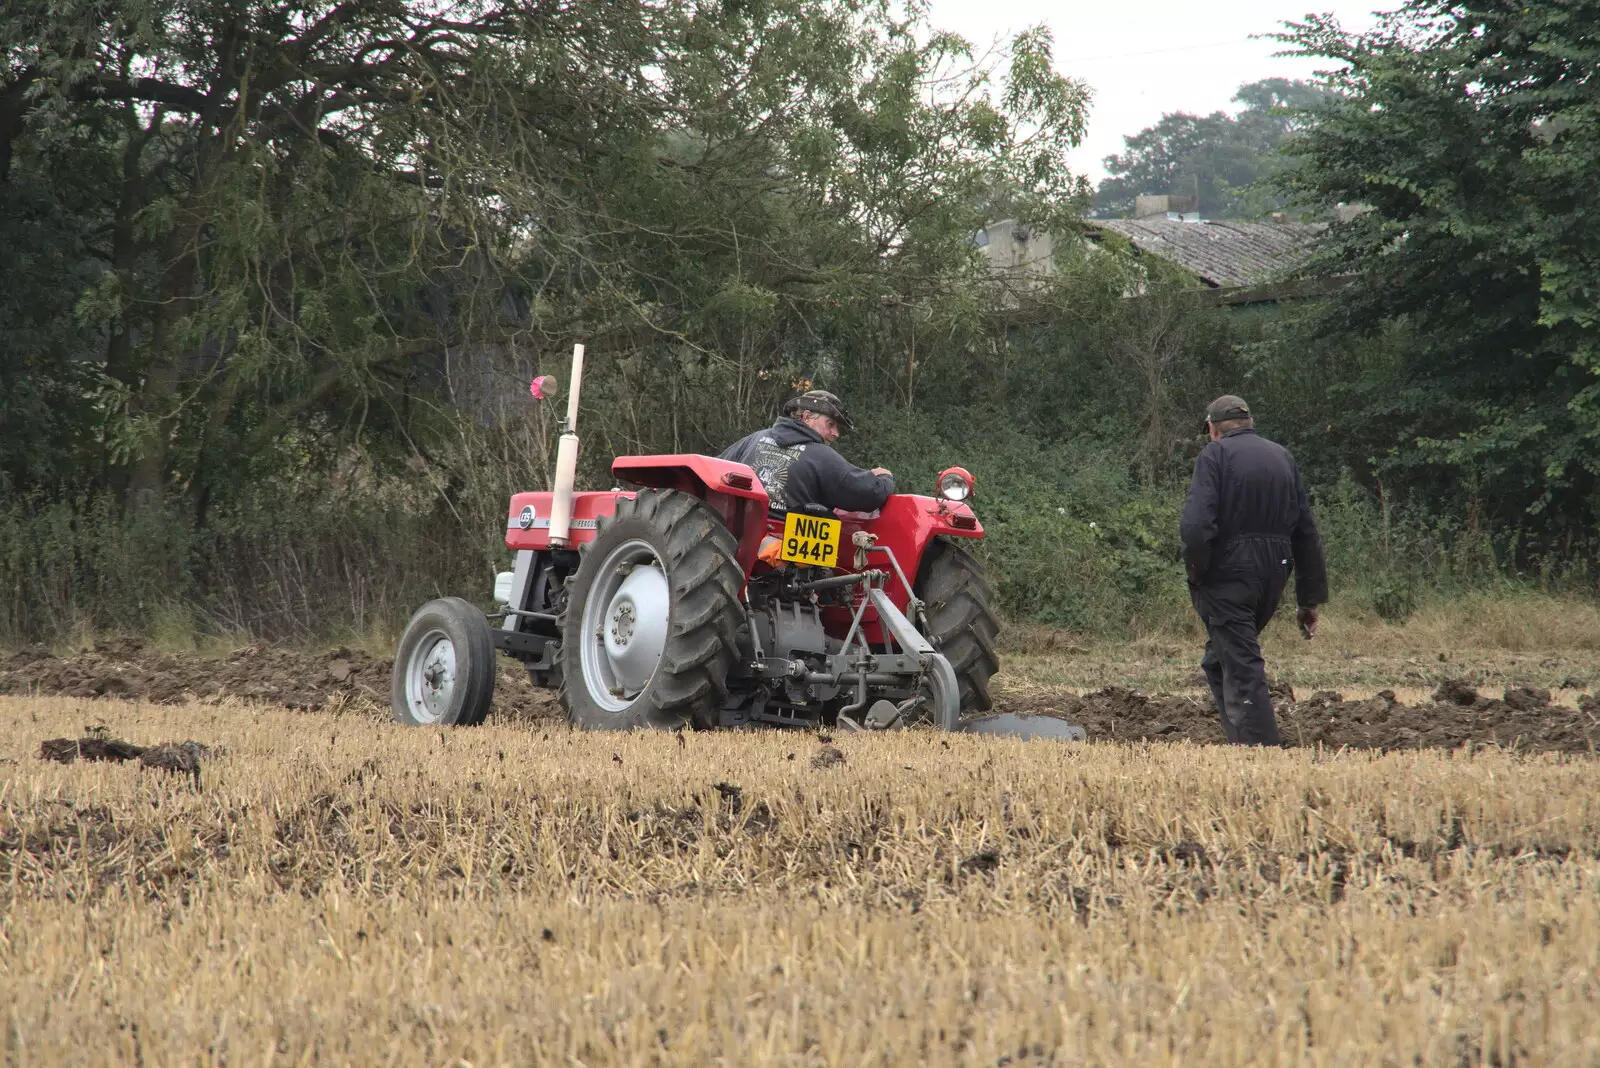 A tractor spins its wheels in the mud, from Vintage Tractor Ploughing, Thrandeston, Suffolk - 26th September 2021